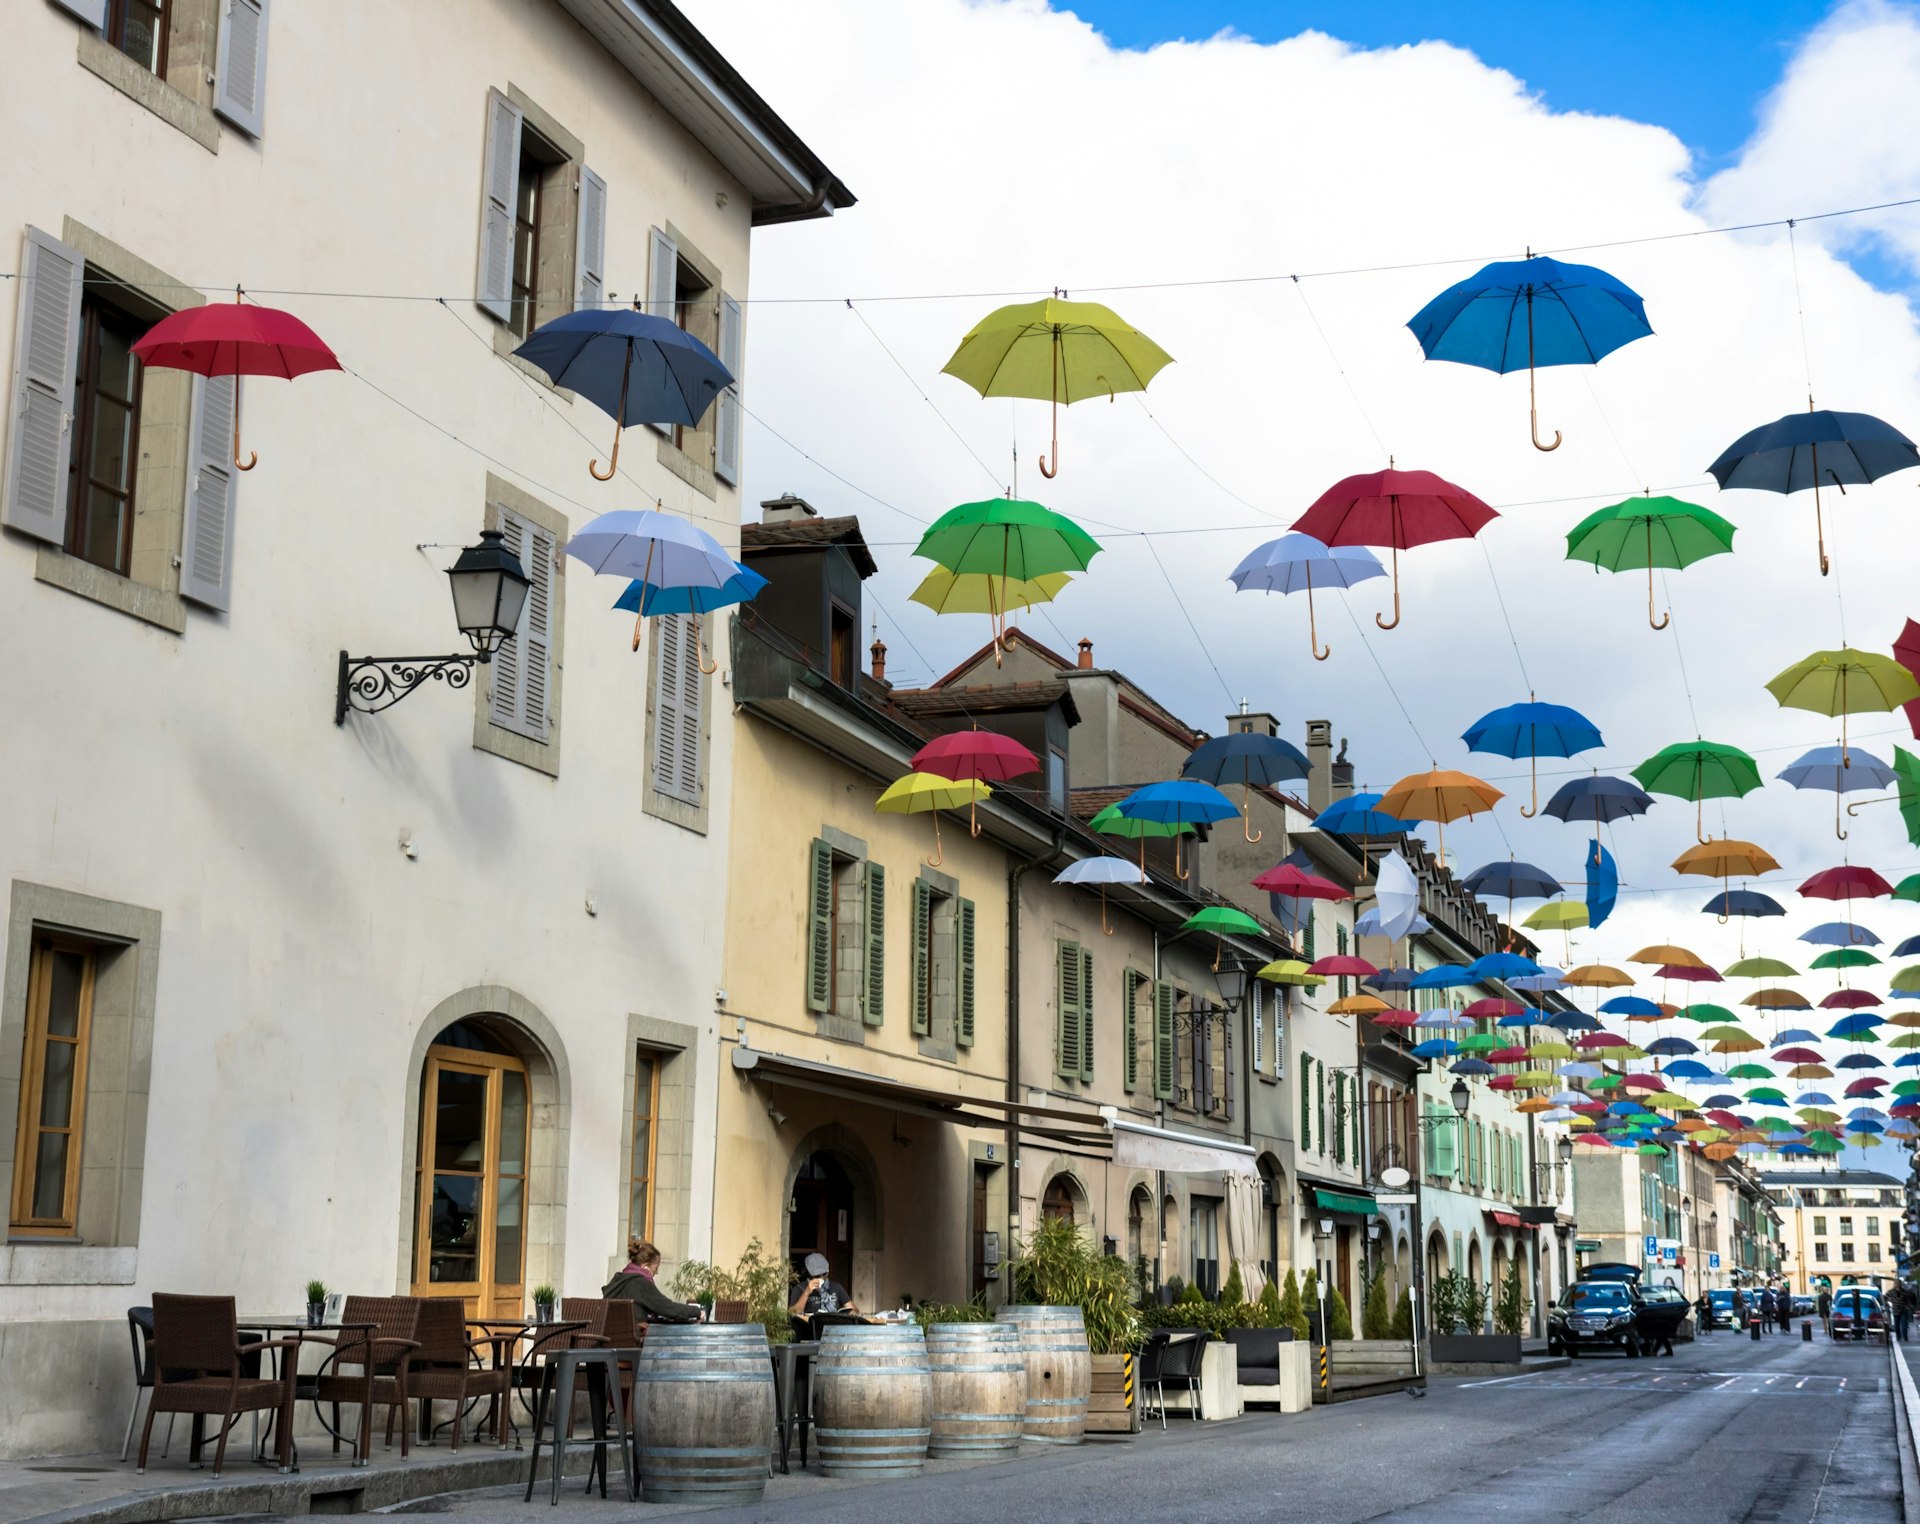 Multicolored umbrellas hang from wires above the street in the Carouge area, Geneva.